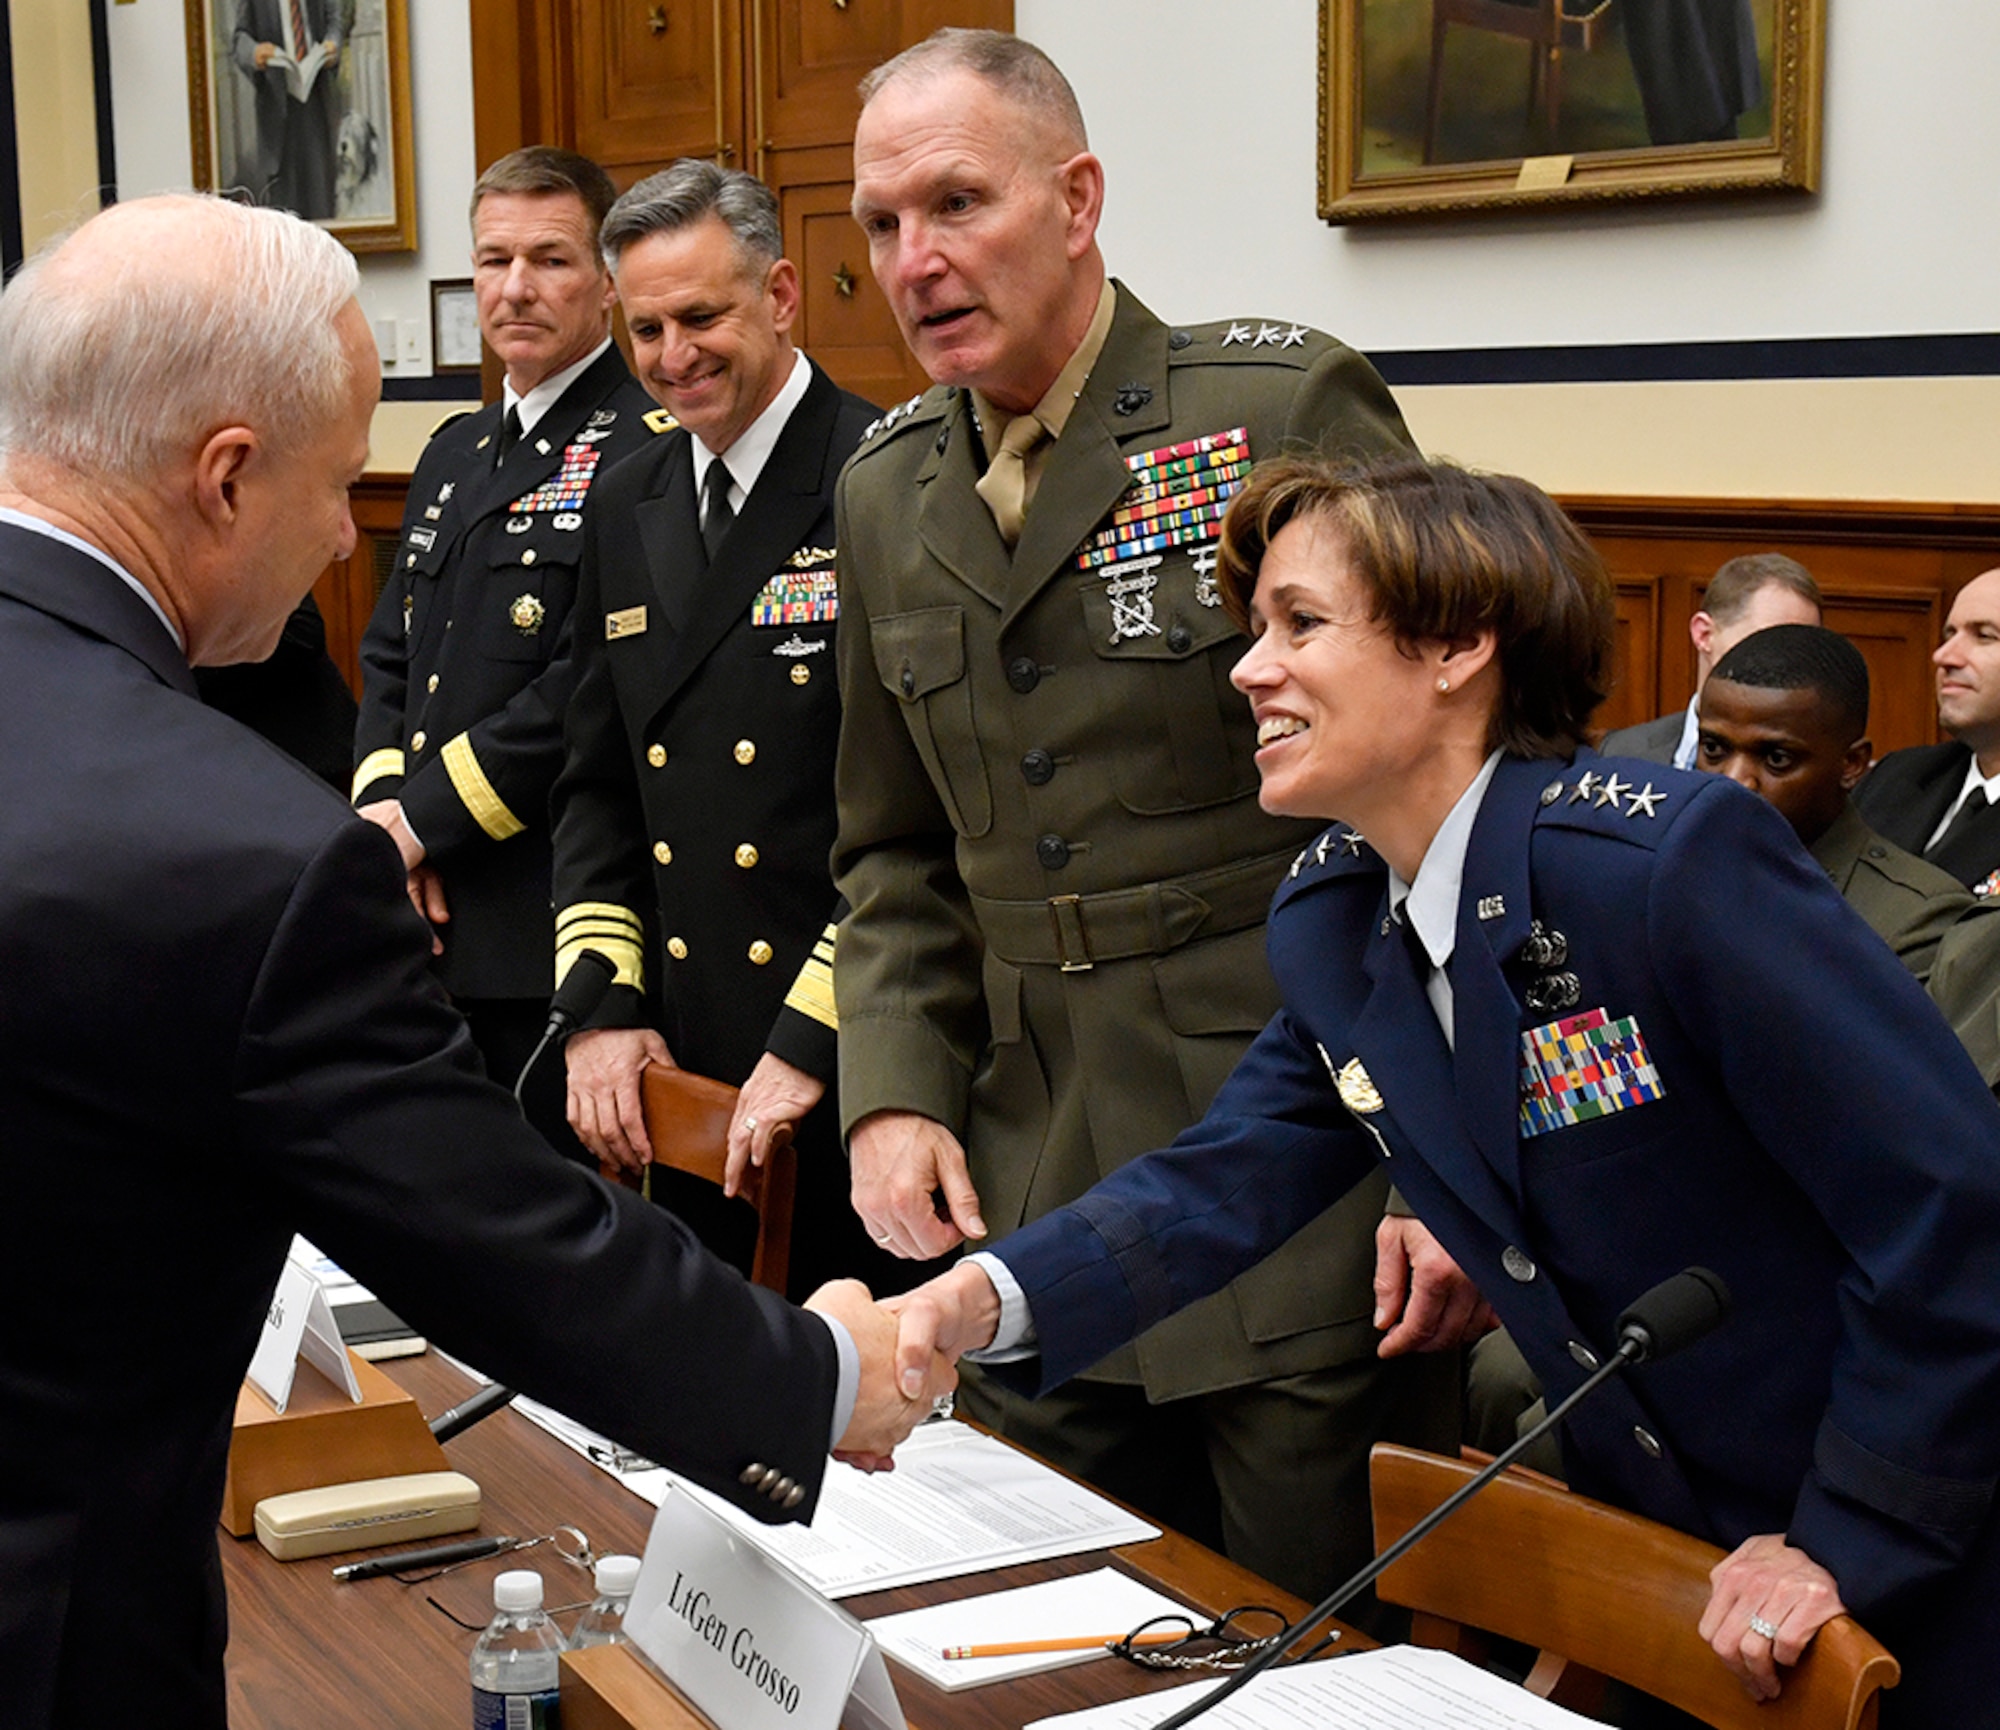 Lt. Gen. Gina Grosso, the Air Force deputy chief of staff for manpower and personnel service greets Rep. Michael Coffman, R-Colo., the chairman of the Military Personnel Subcommittee before testifying on military personnel posture May 17, 2017, in Washington, D.C. Grosso testified with Marine Corps Lt. Gen. Mark Brilakis, the U.S. Marine Corps deputy commandant for manpower and reserve affairs; Navy Vice Adm. Robert Burke, the U.S. Navy Chief of naval personnel; and Army Maj. Gen. Erik Peterson, the U.S. Army director of Army aviation. (U.S. Air Force photo/Wayne A. Clark)